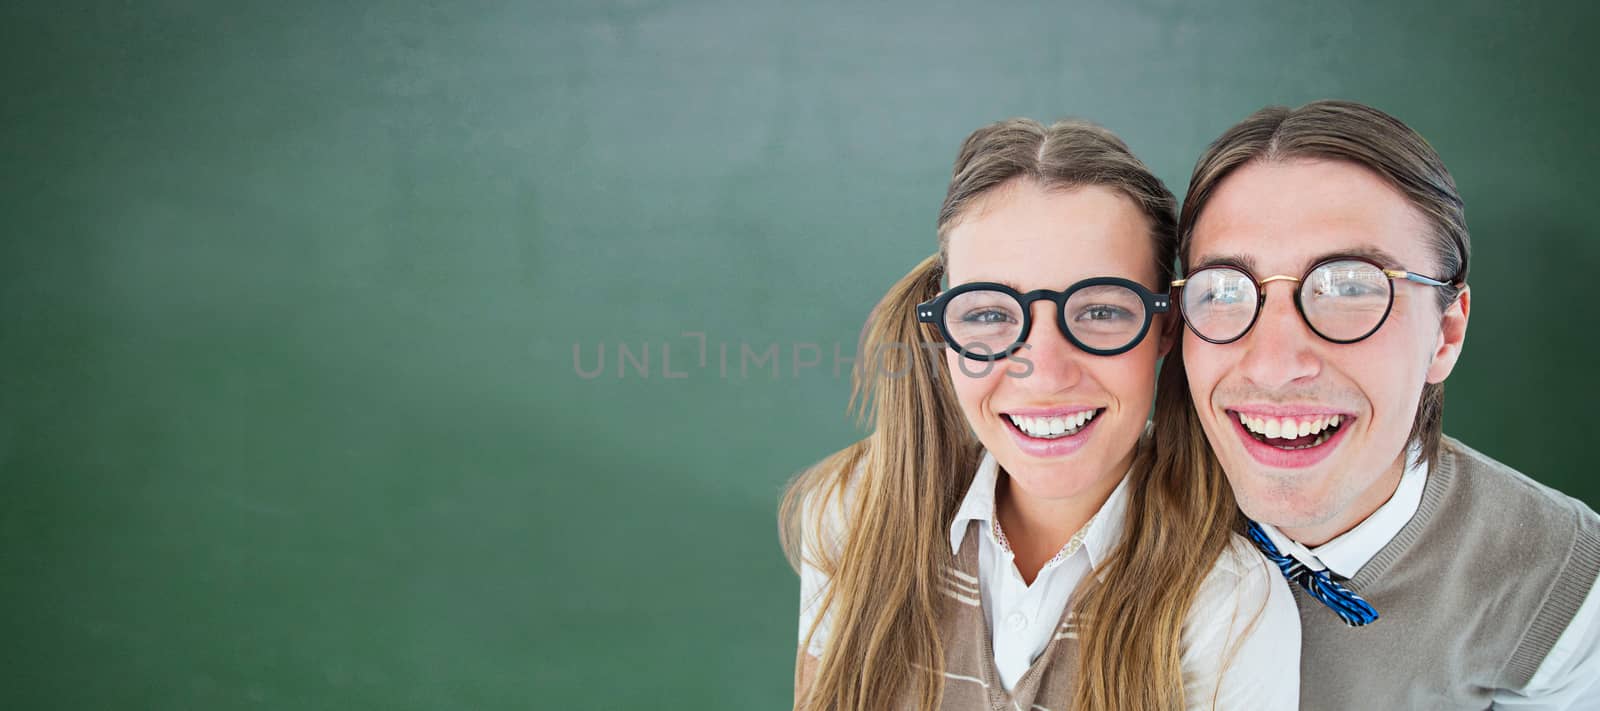 Geeky hipsters smiling at camera  against green chalkboard